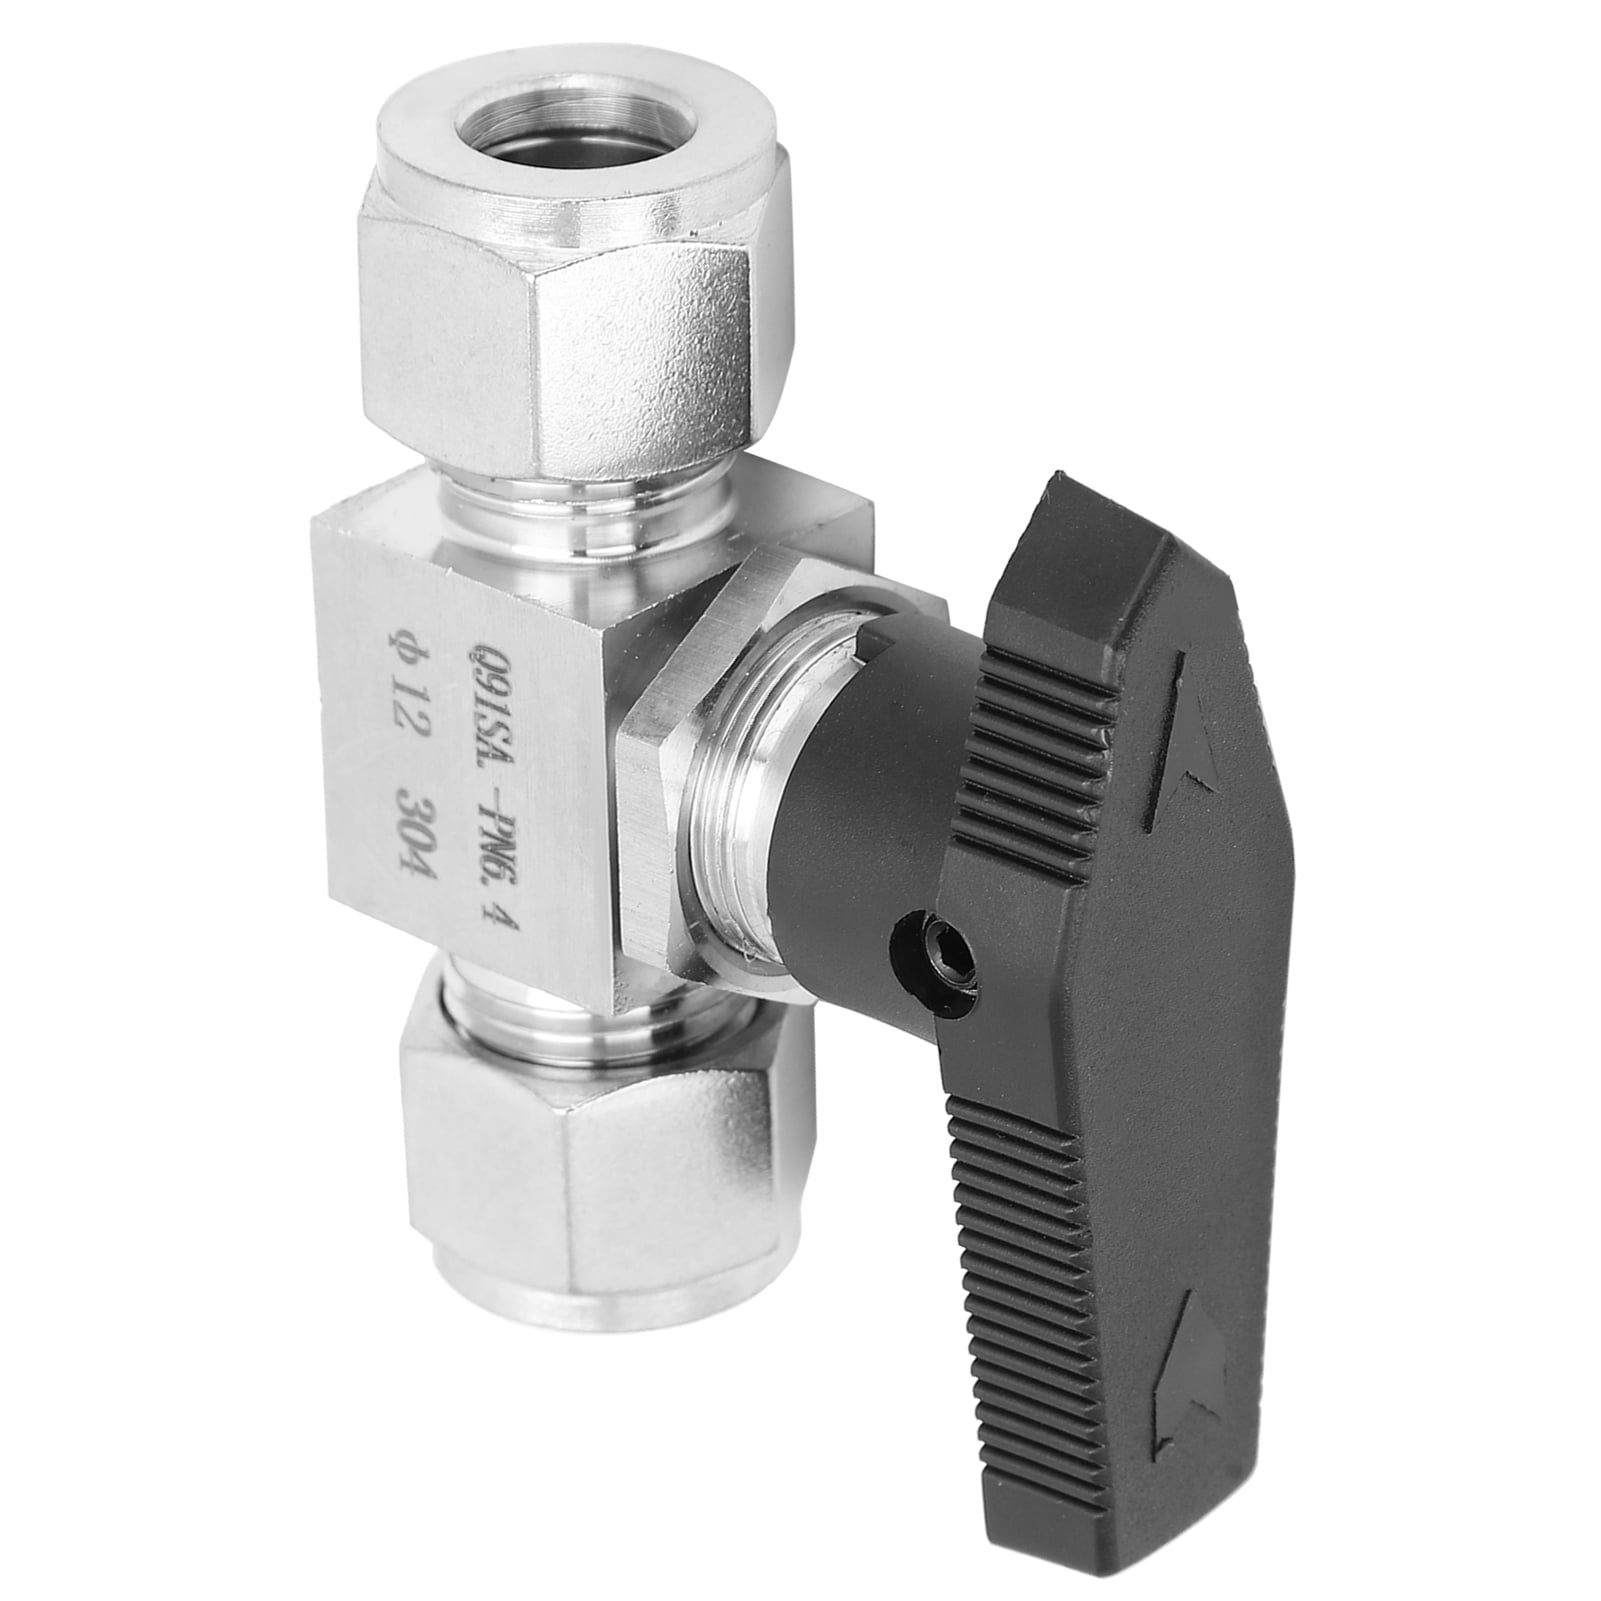 Strong Connection Smooth 930Psi Delicate SS‑44S6 Needle Valve Ф10 304 Stainless Steel Valve for Water Gas Oil Automobile And Shipbuilding Industry 